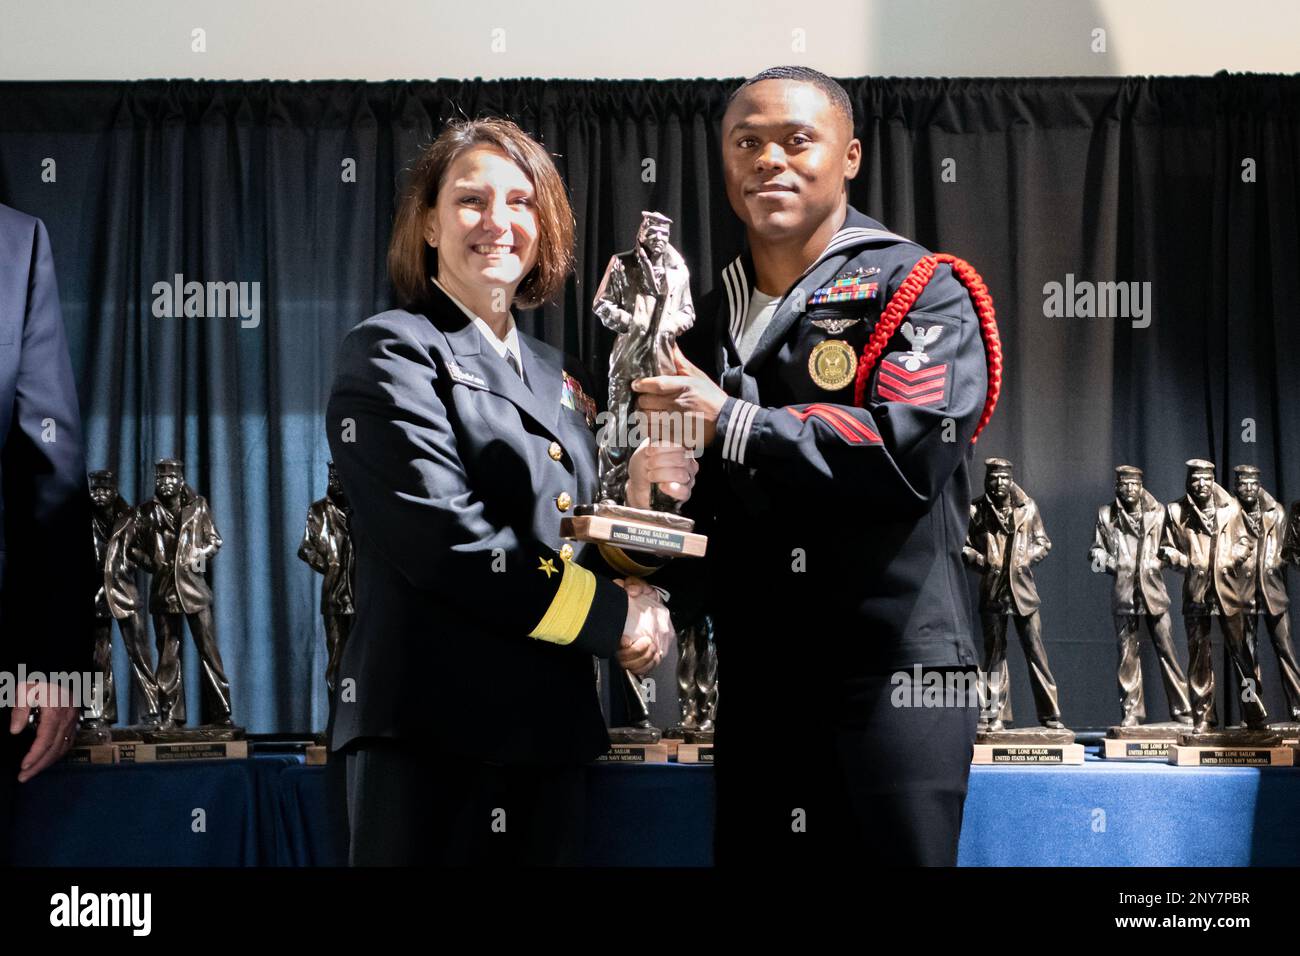 Rear Adm. Jennifer Couture, commander, Naval Service Training Command (NSTC), poses for a photo with Interior Communications Electrician 1st Class Daquan King, Recruit Training Command's Recruit Division Commander of the Year, during the Lake County Navy League's Sailor of the Year (SOY) awards ceremony at the National Museum of the American Sailor in Great Lakes, Il. Jan. 25. More than 40,000 recruits train annually at the Navy's only boot camp. Stock Photo